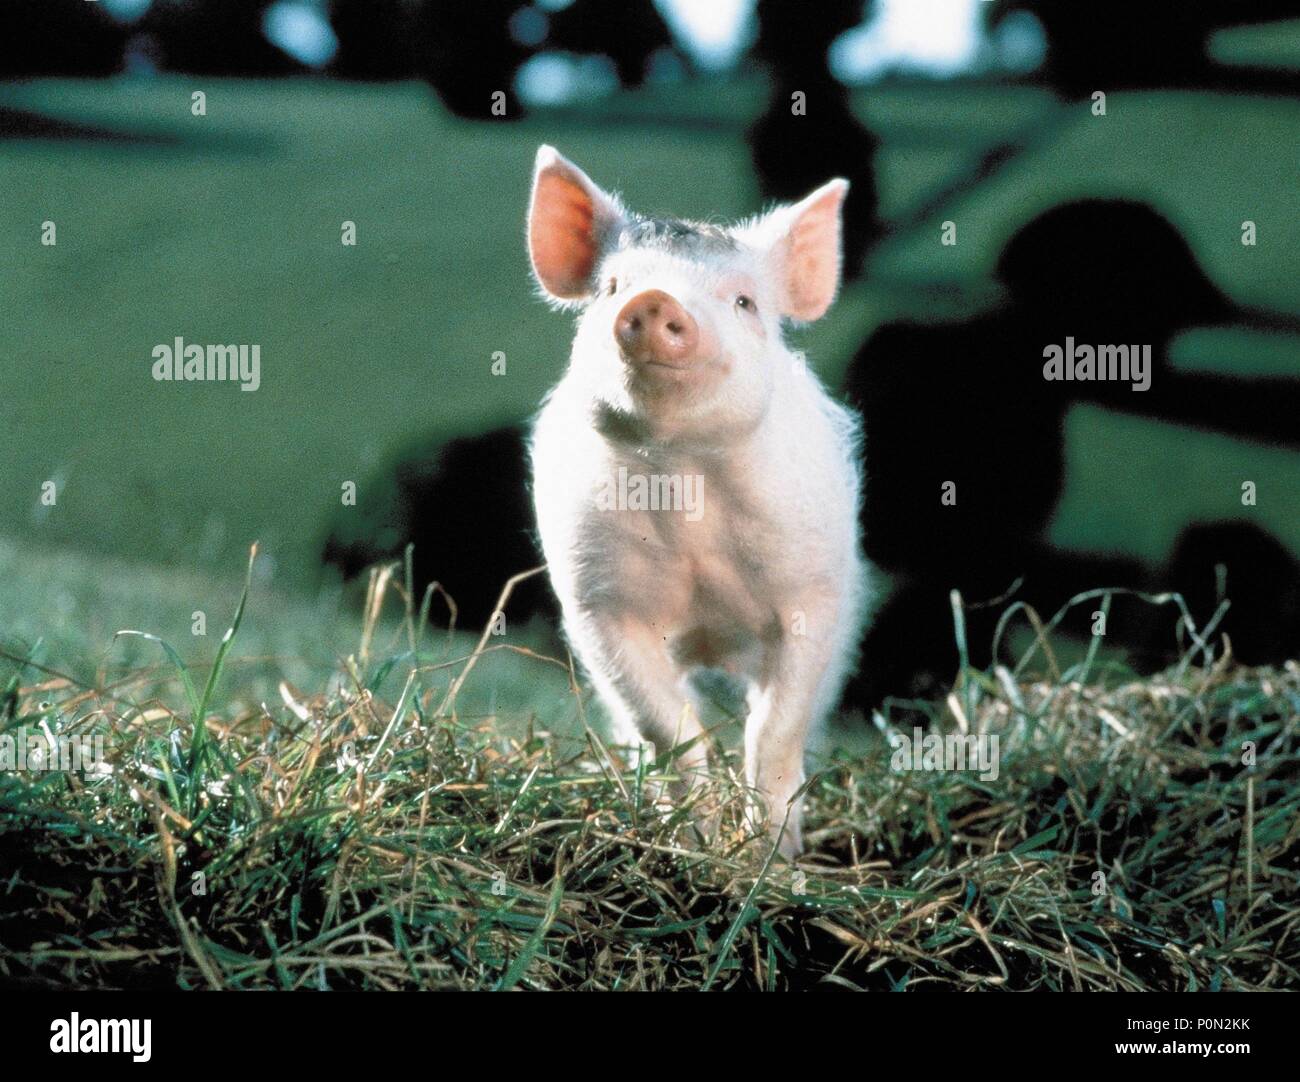 Original Film Title: BABE, THE GALLANT PIG.  English Title: BABE, THE GALLANT PIG.  Film Director: CHRIS NOONAN.  Year: 1995. Credit: UNIVERSAL PICTURES / Album Stock Photo